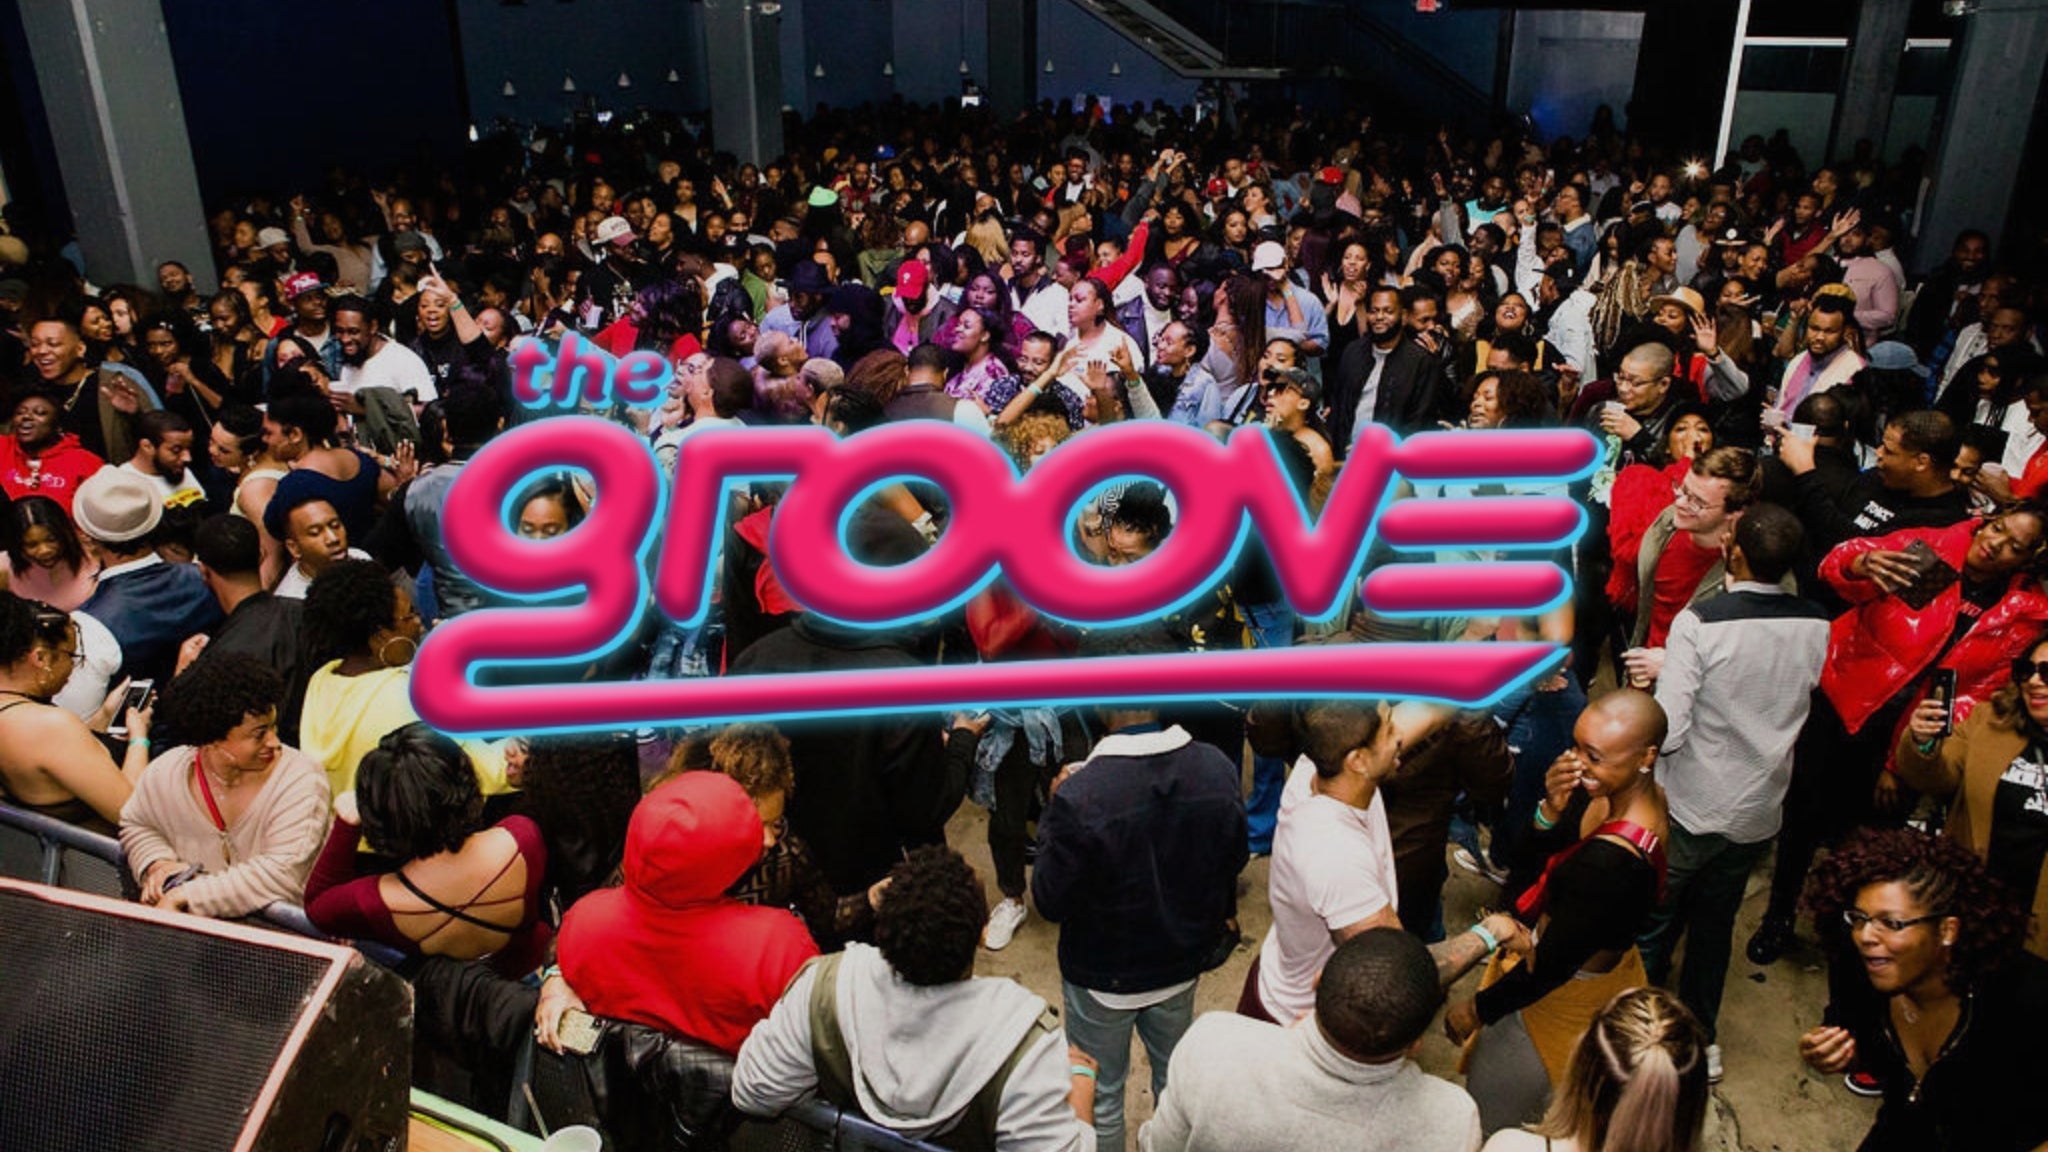 The Groove R&B All Night  in Atlanta promo photo for Advance Tier 1 presale offer code